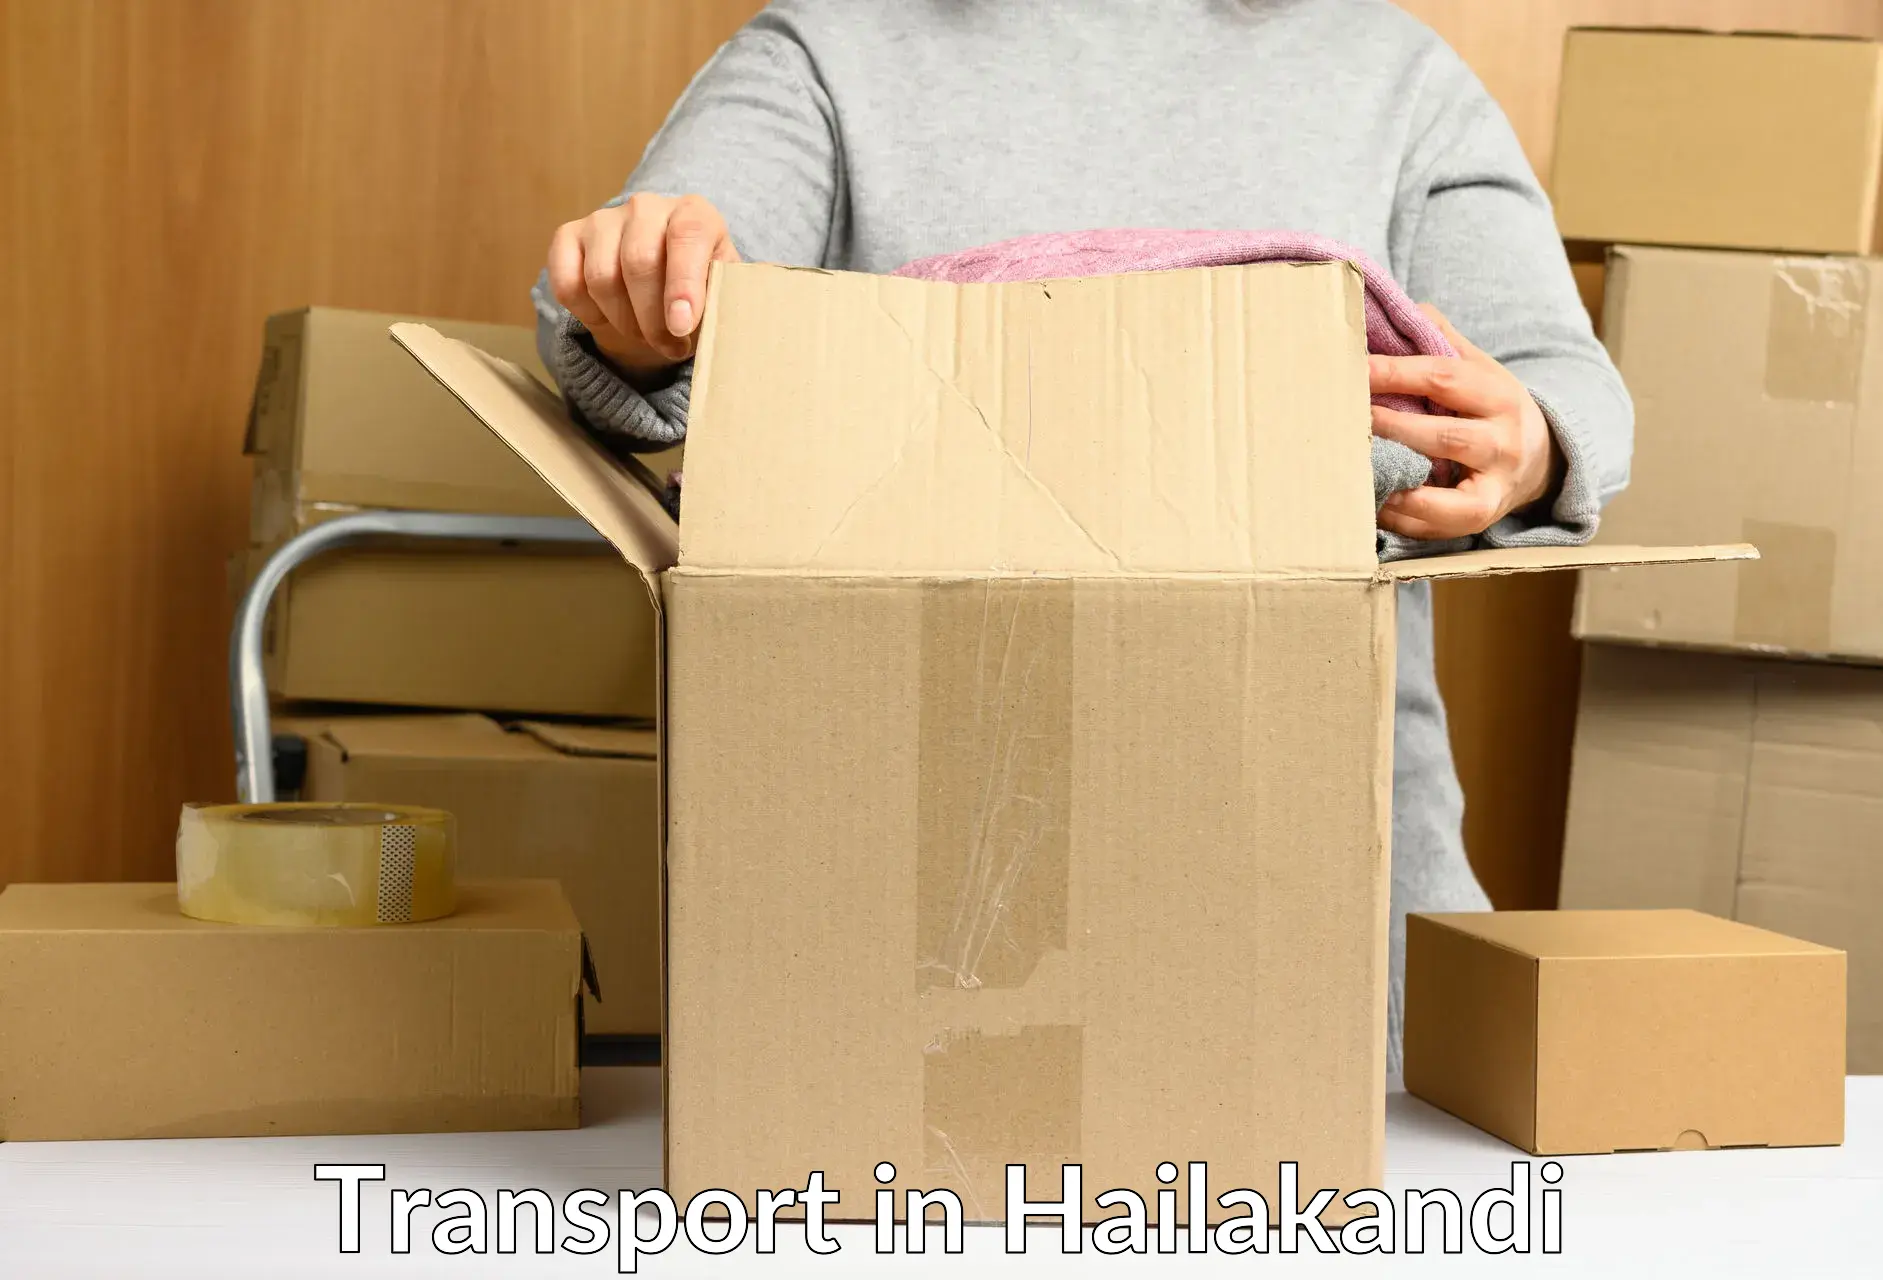 Container transportation services in Hailakandi